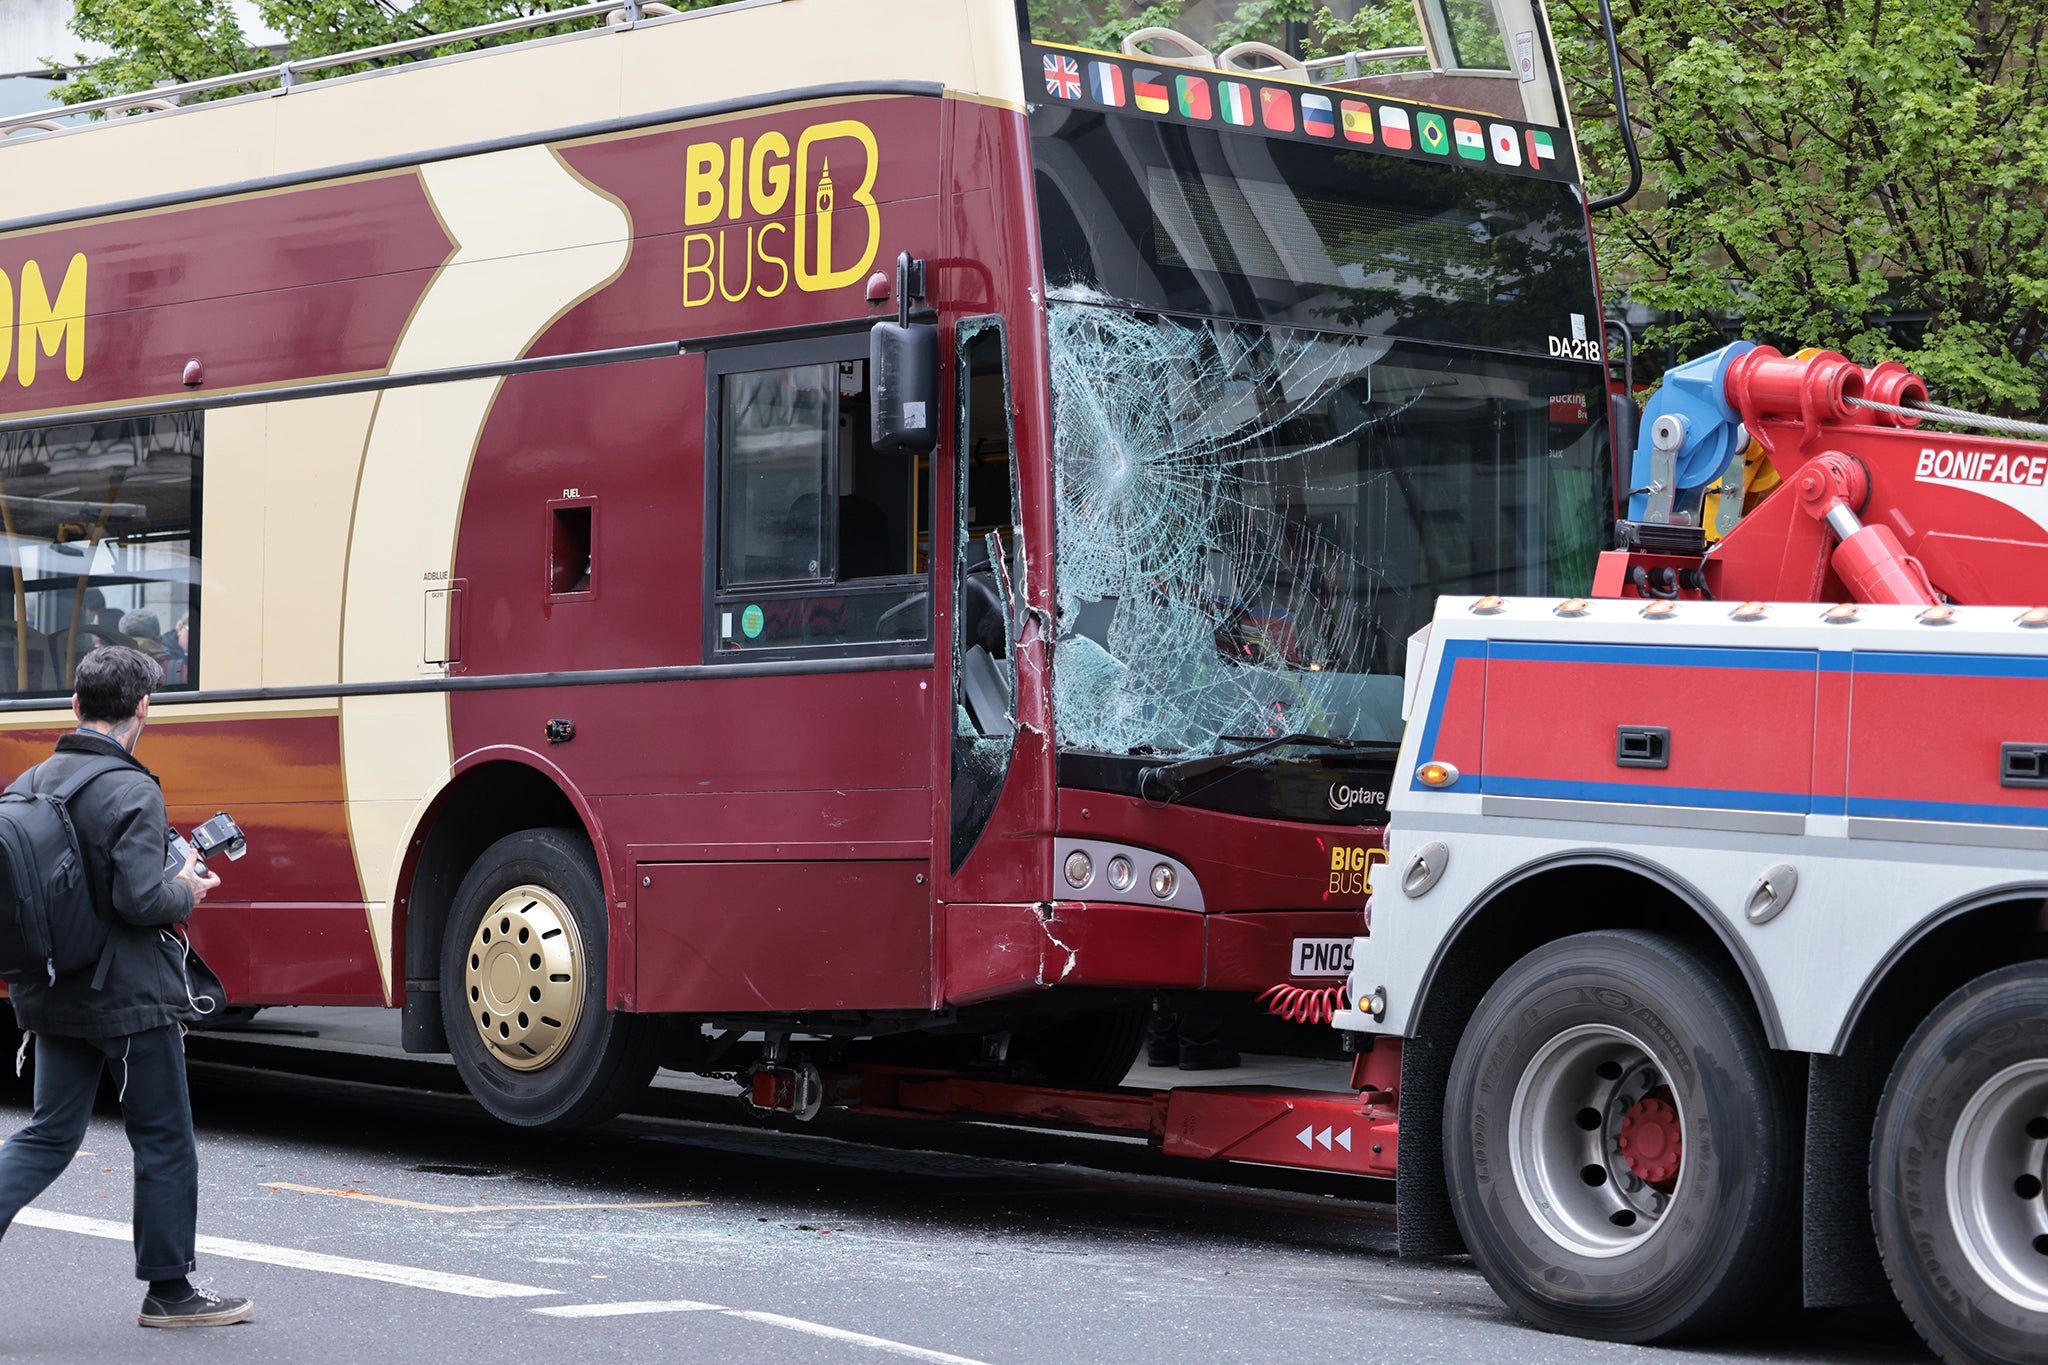 The damaged tour bus after a horse collided with its windscreen